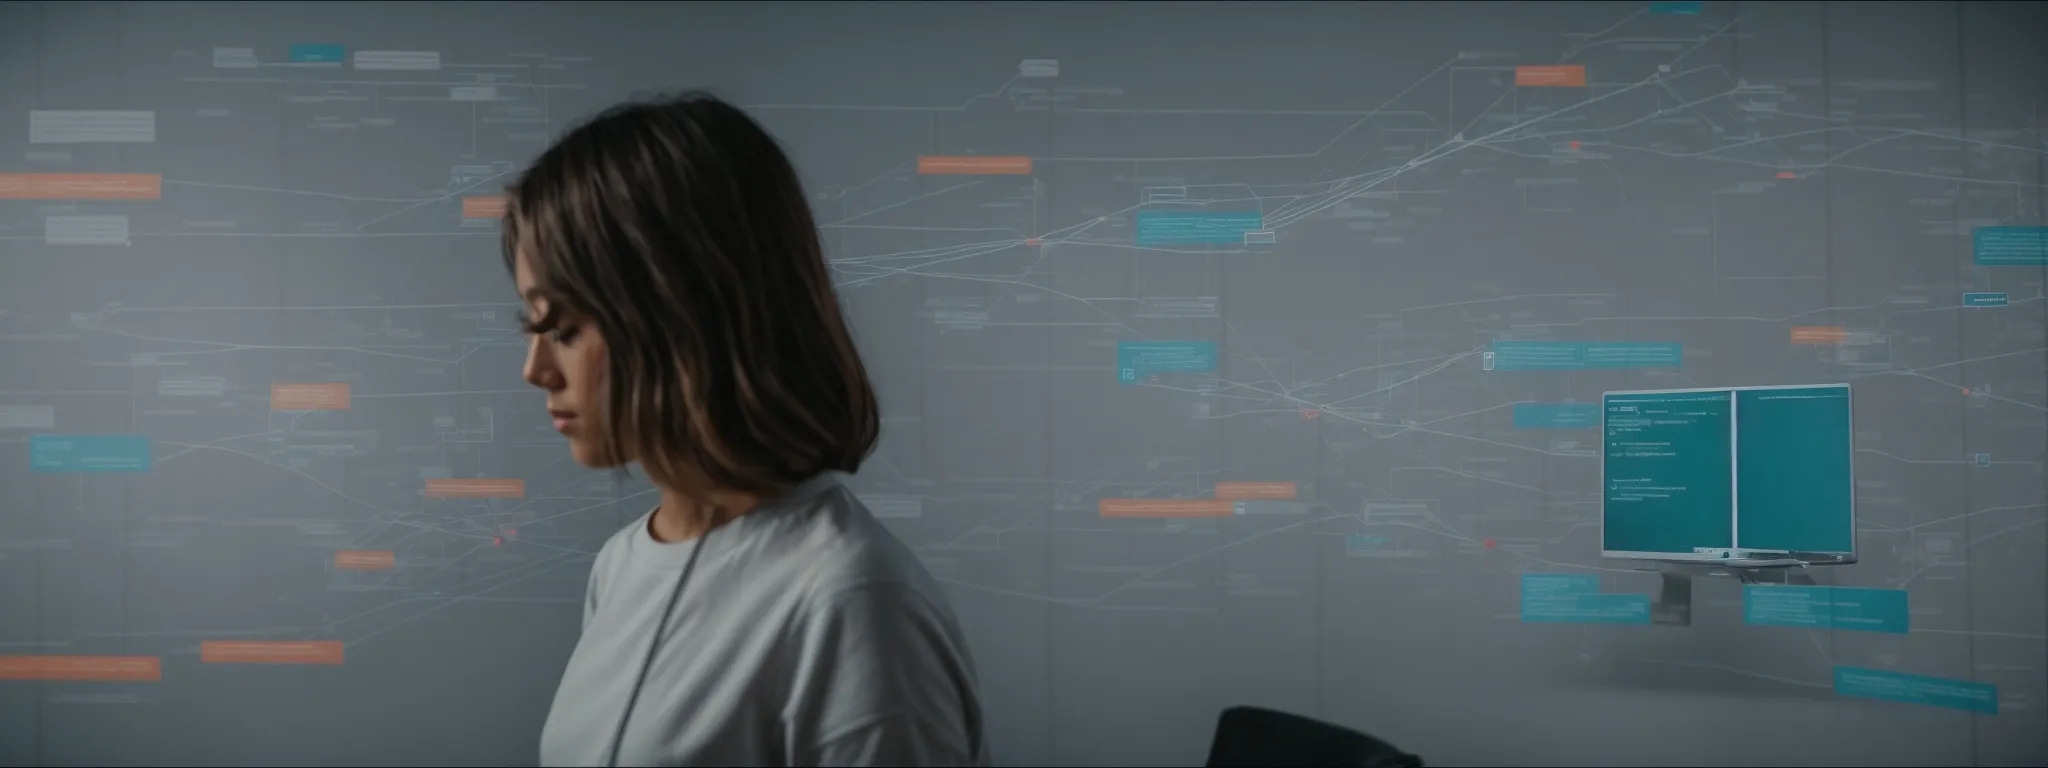 a person analyzing a complex flowchart representing website connections on a large digital screen.